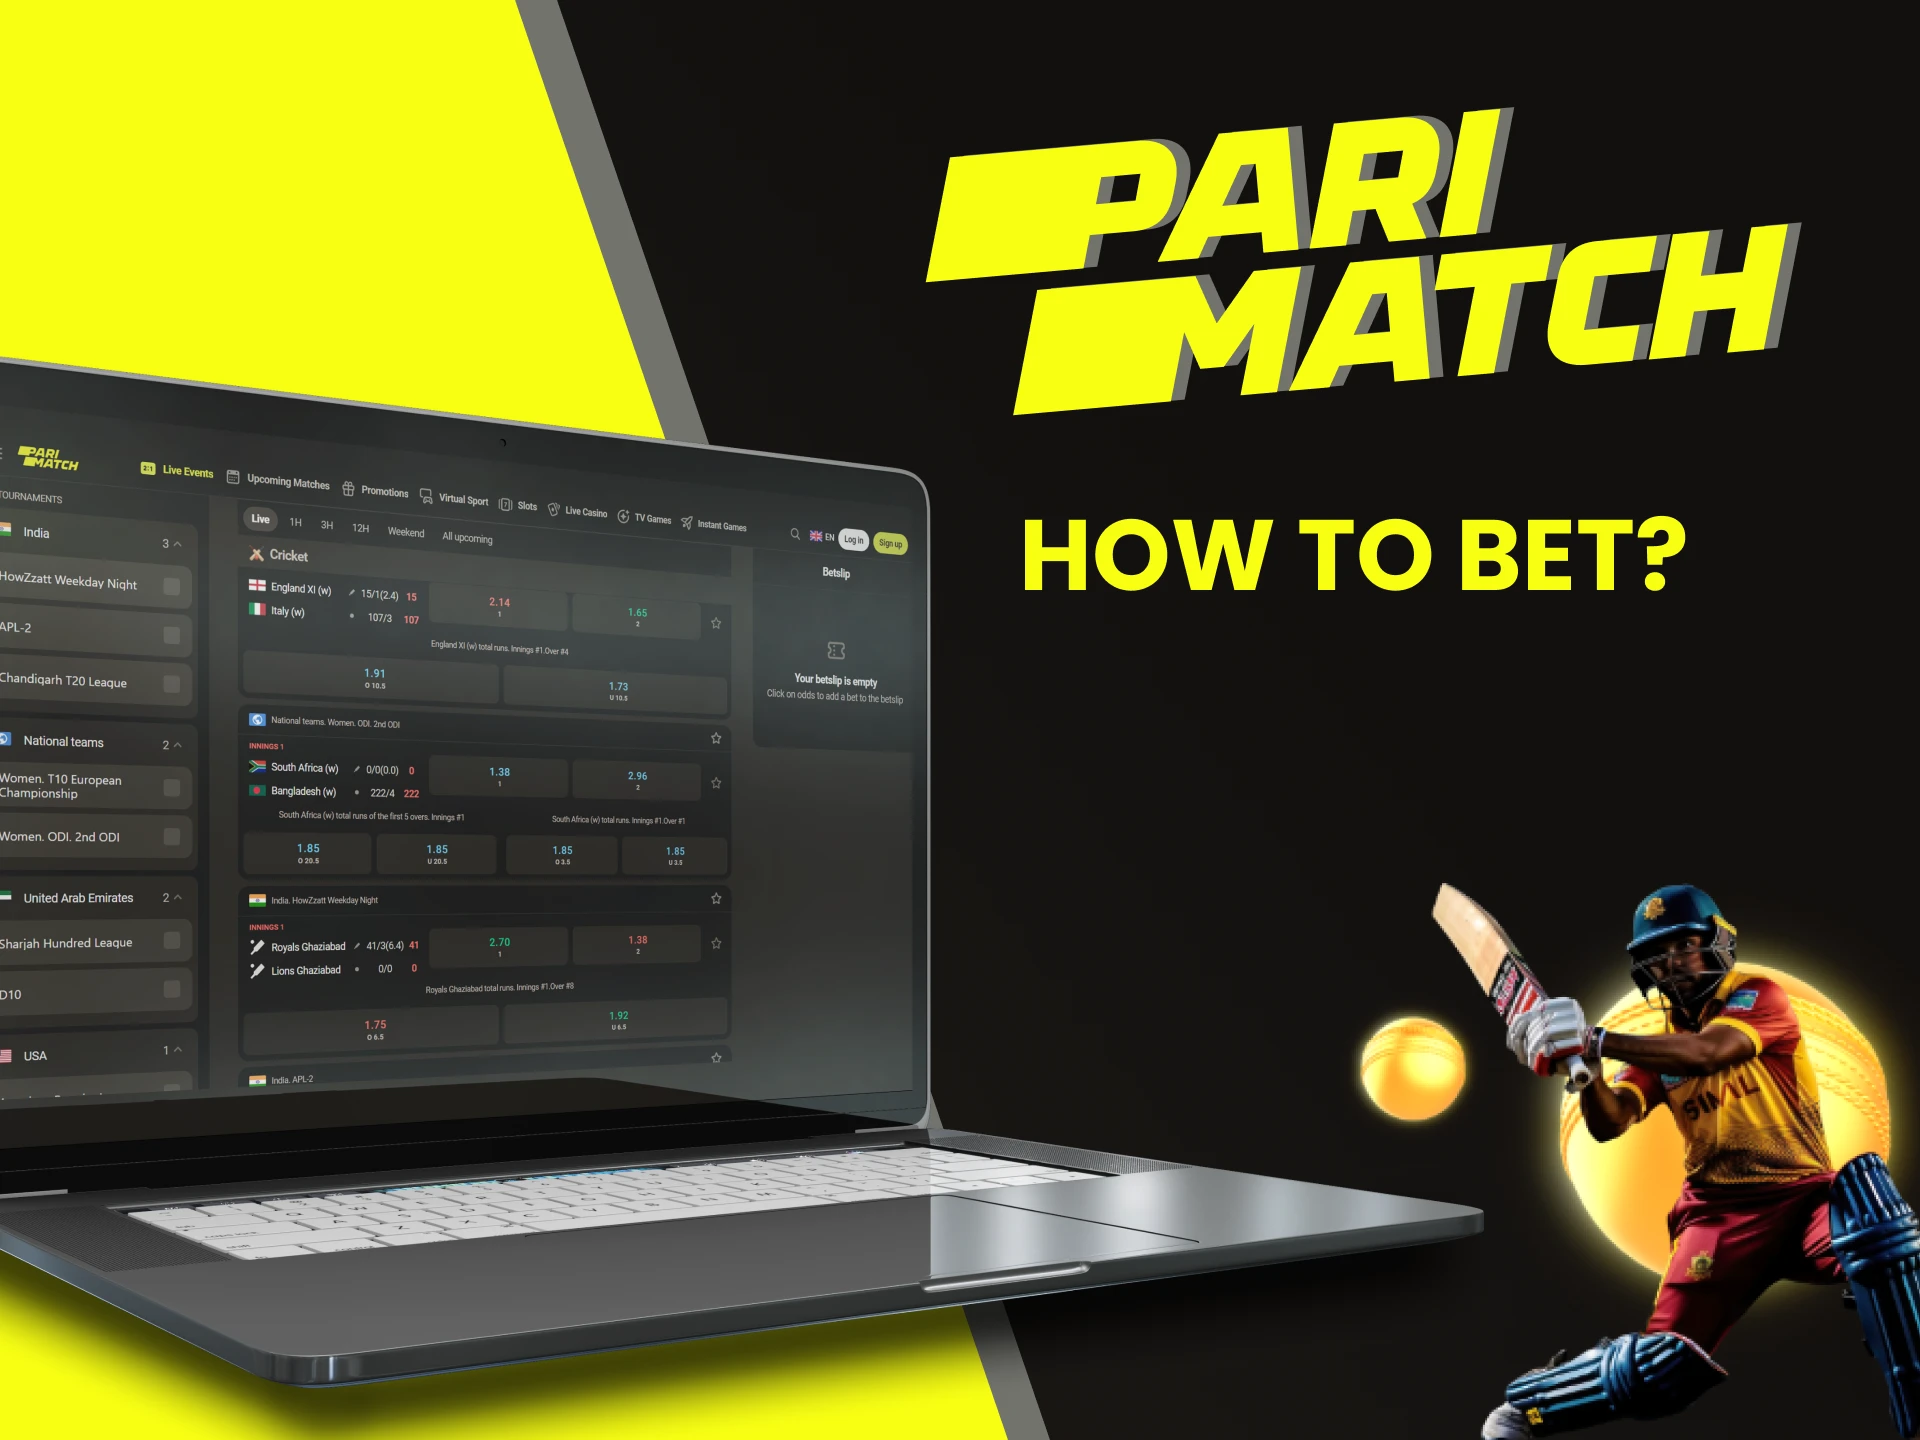 Go to the sports section for betting on cricket from Parimatch.